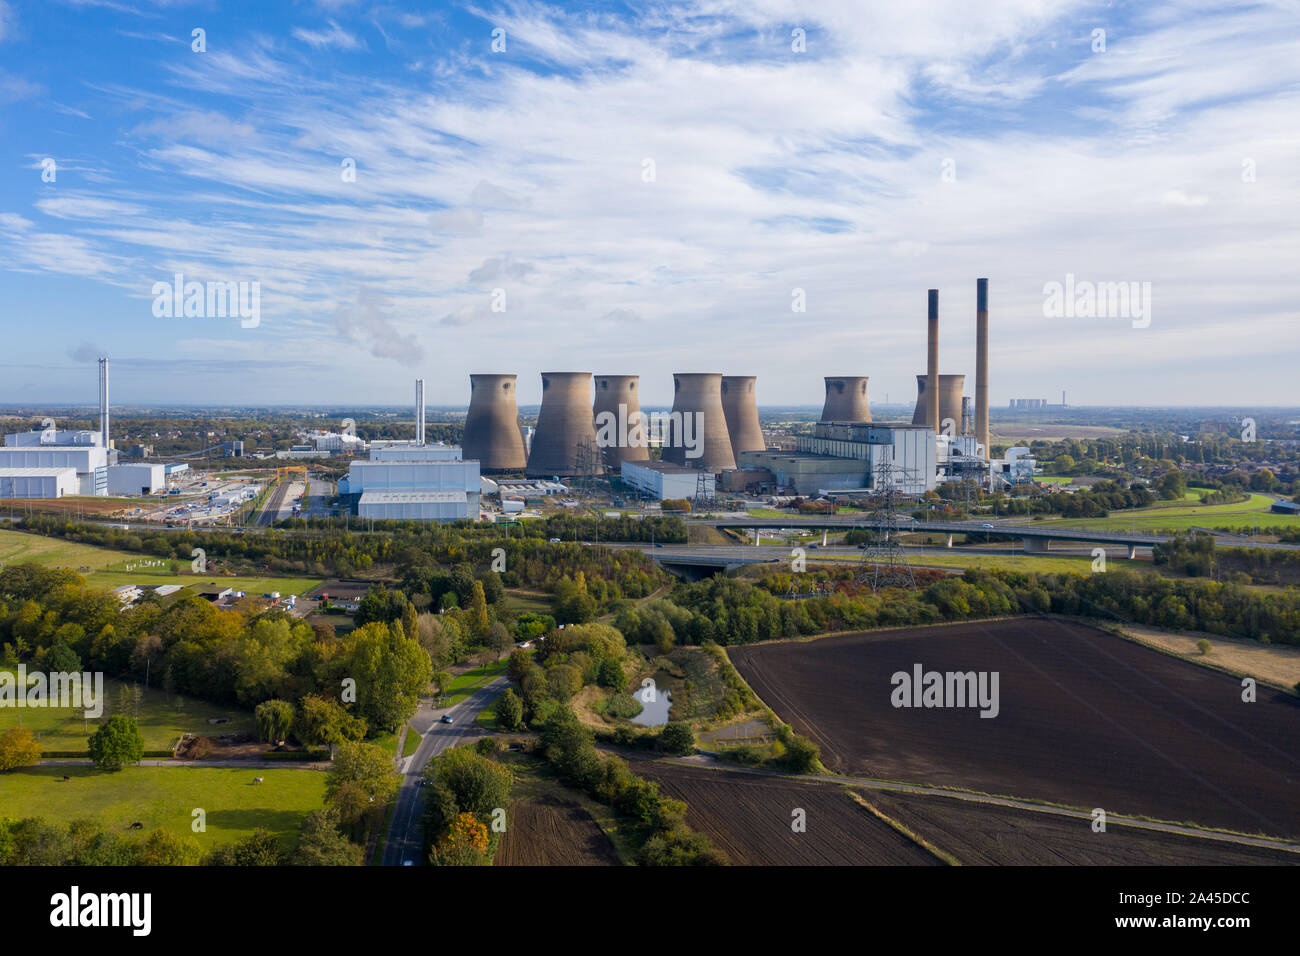 Aerial photo of the Ferrybridge Power Station located in the Castleford area of Wakefield in the UK, showing the power station cooling towers. Stock Photo